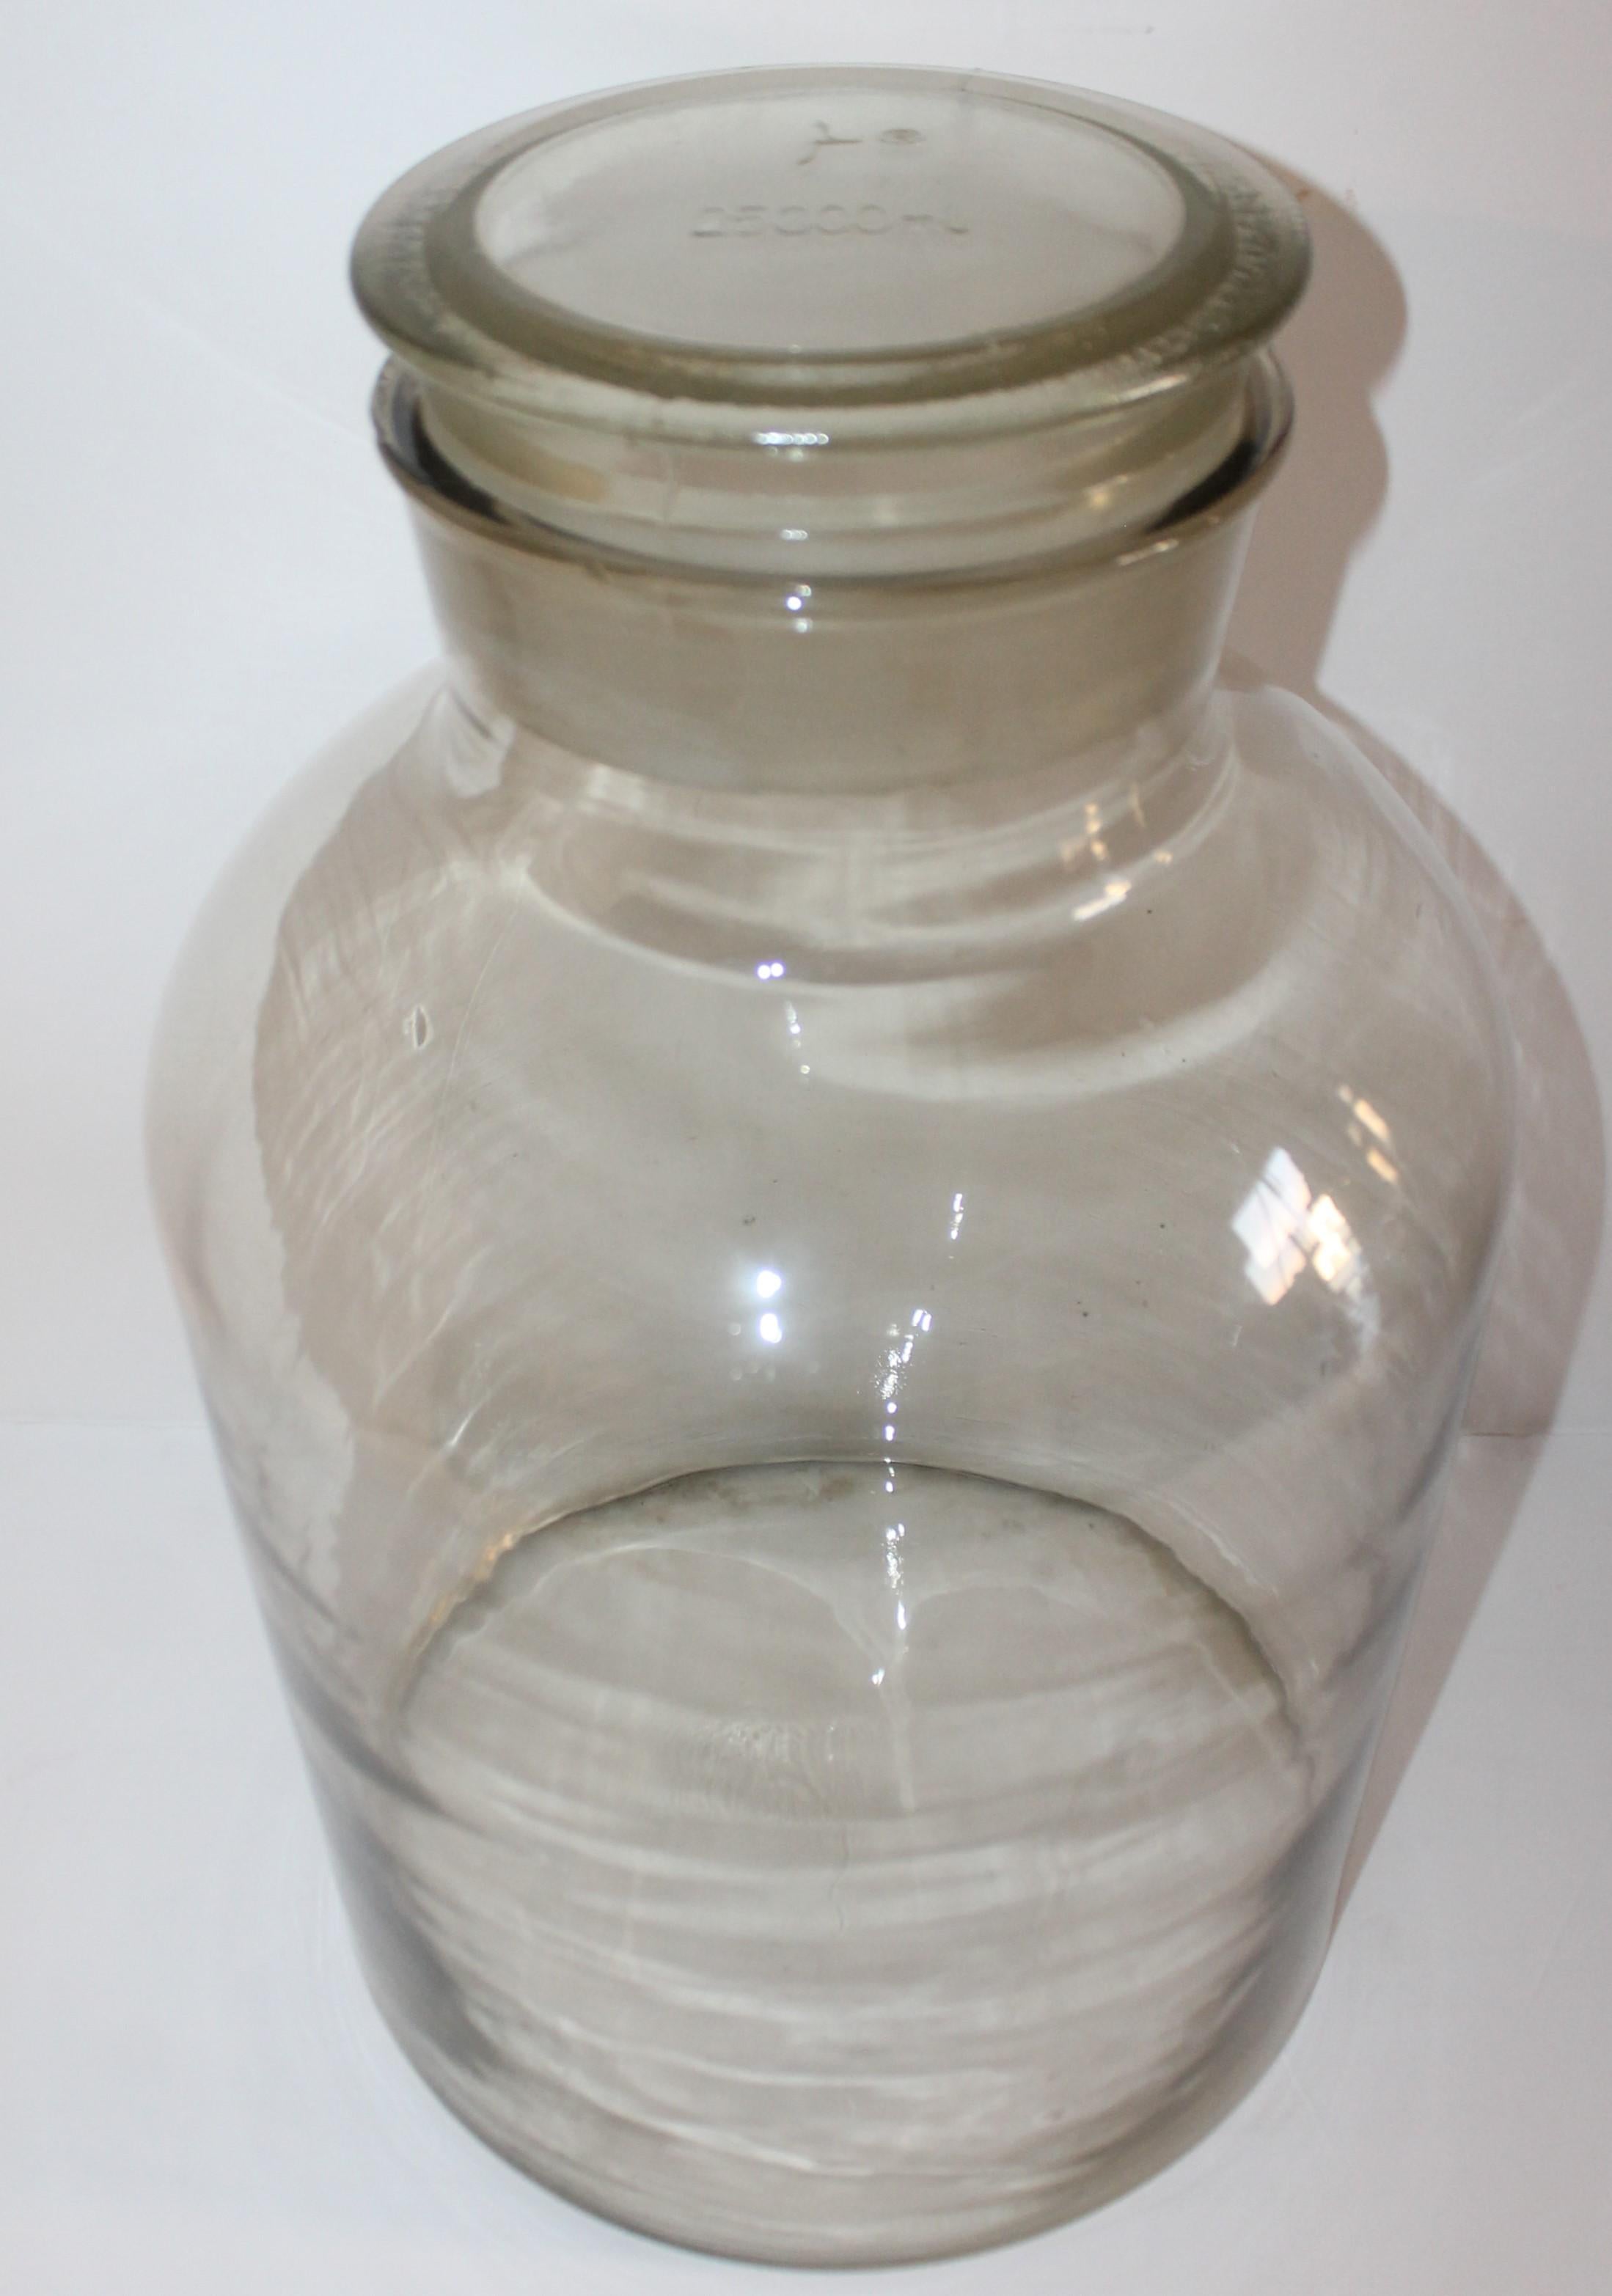 19th century apothecary jar with frosted trim on lid. The condition is very good and full of bubbles in the glass. Great filled with collections of miniatures or candy.